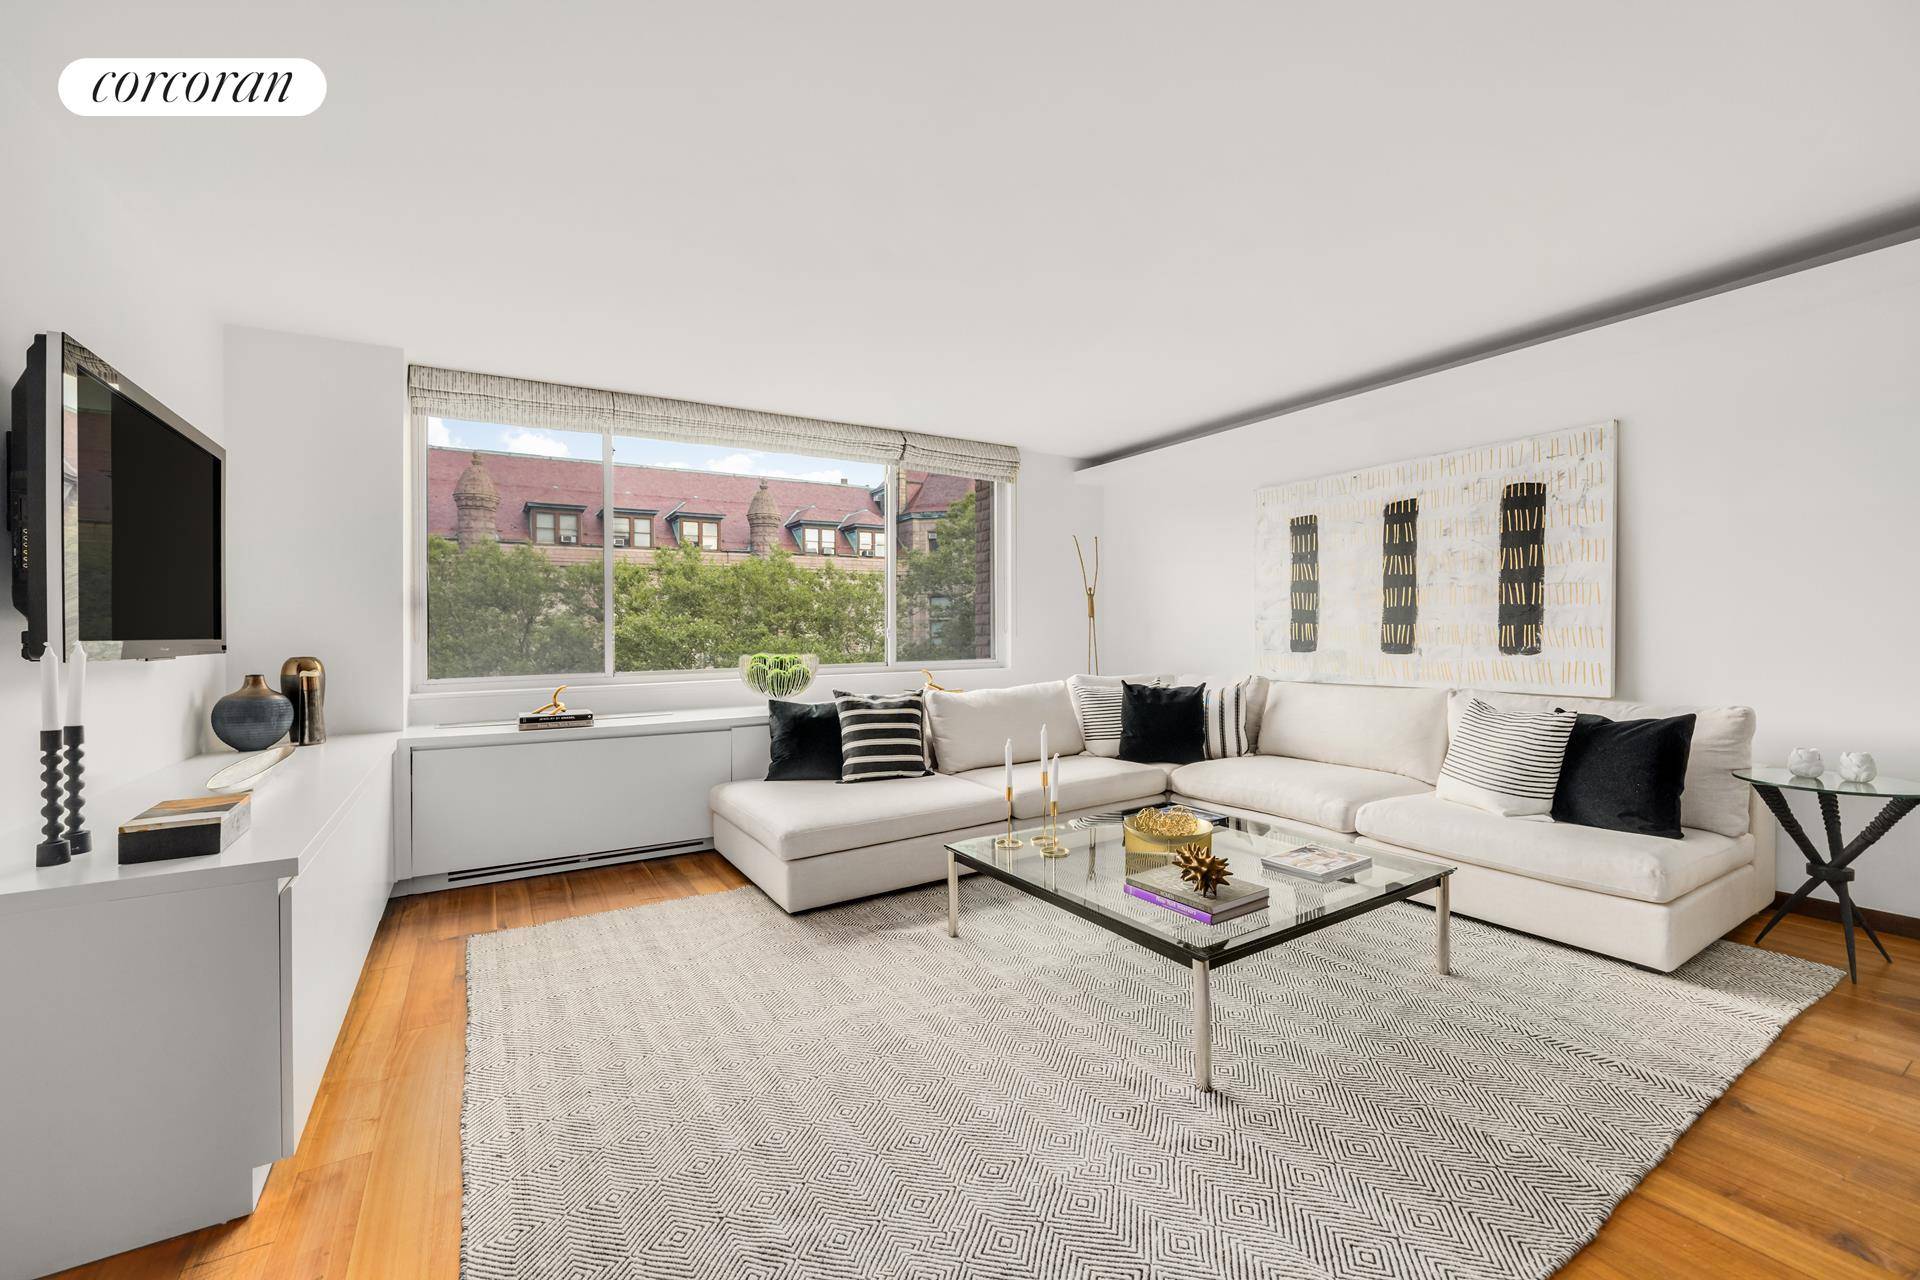 Nestled in the heart of the vibrant Upper West Side, this beautifully renovated 2 bedroom 2 bathroom condominium faces east, overlooking the verdant grounds of The Museum of Natural History, ...